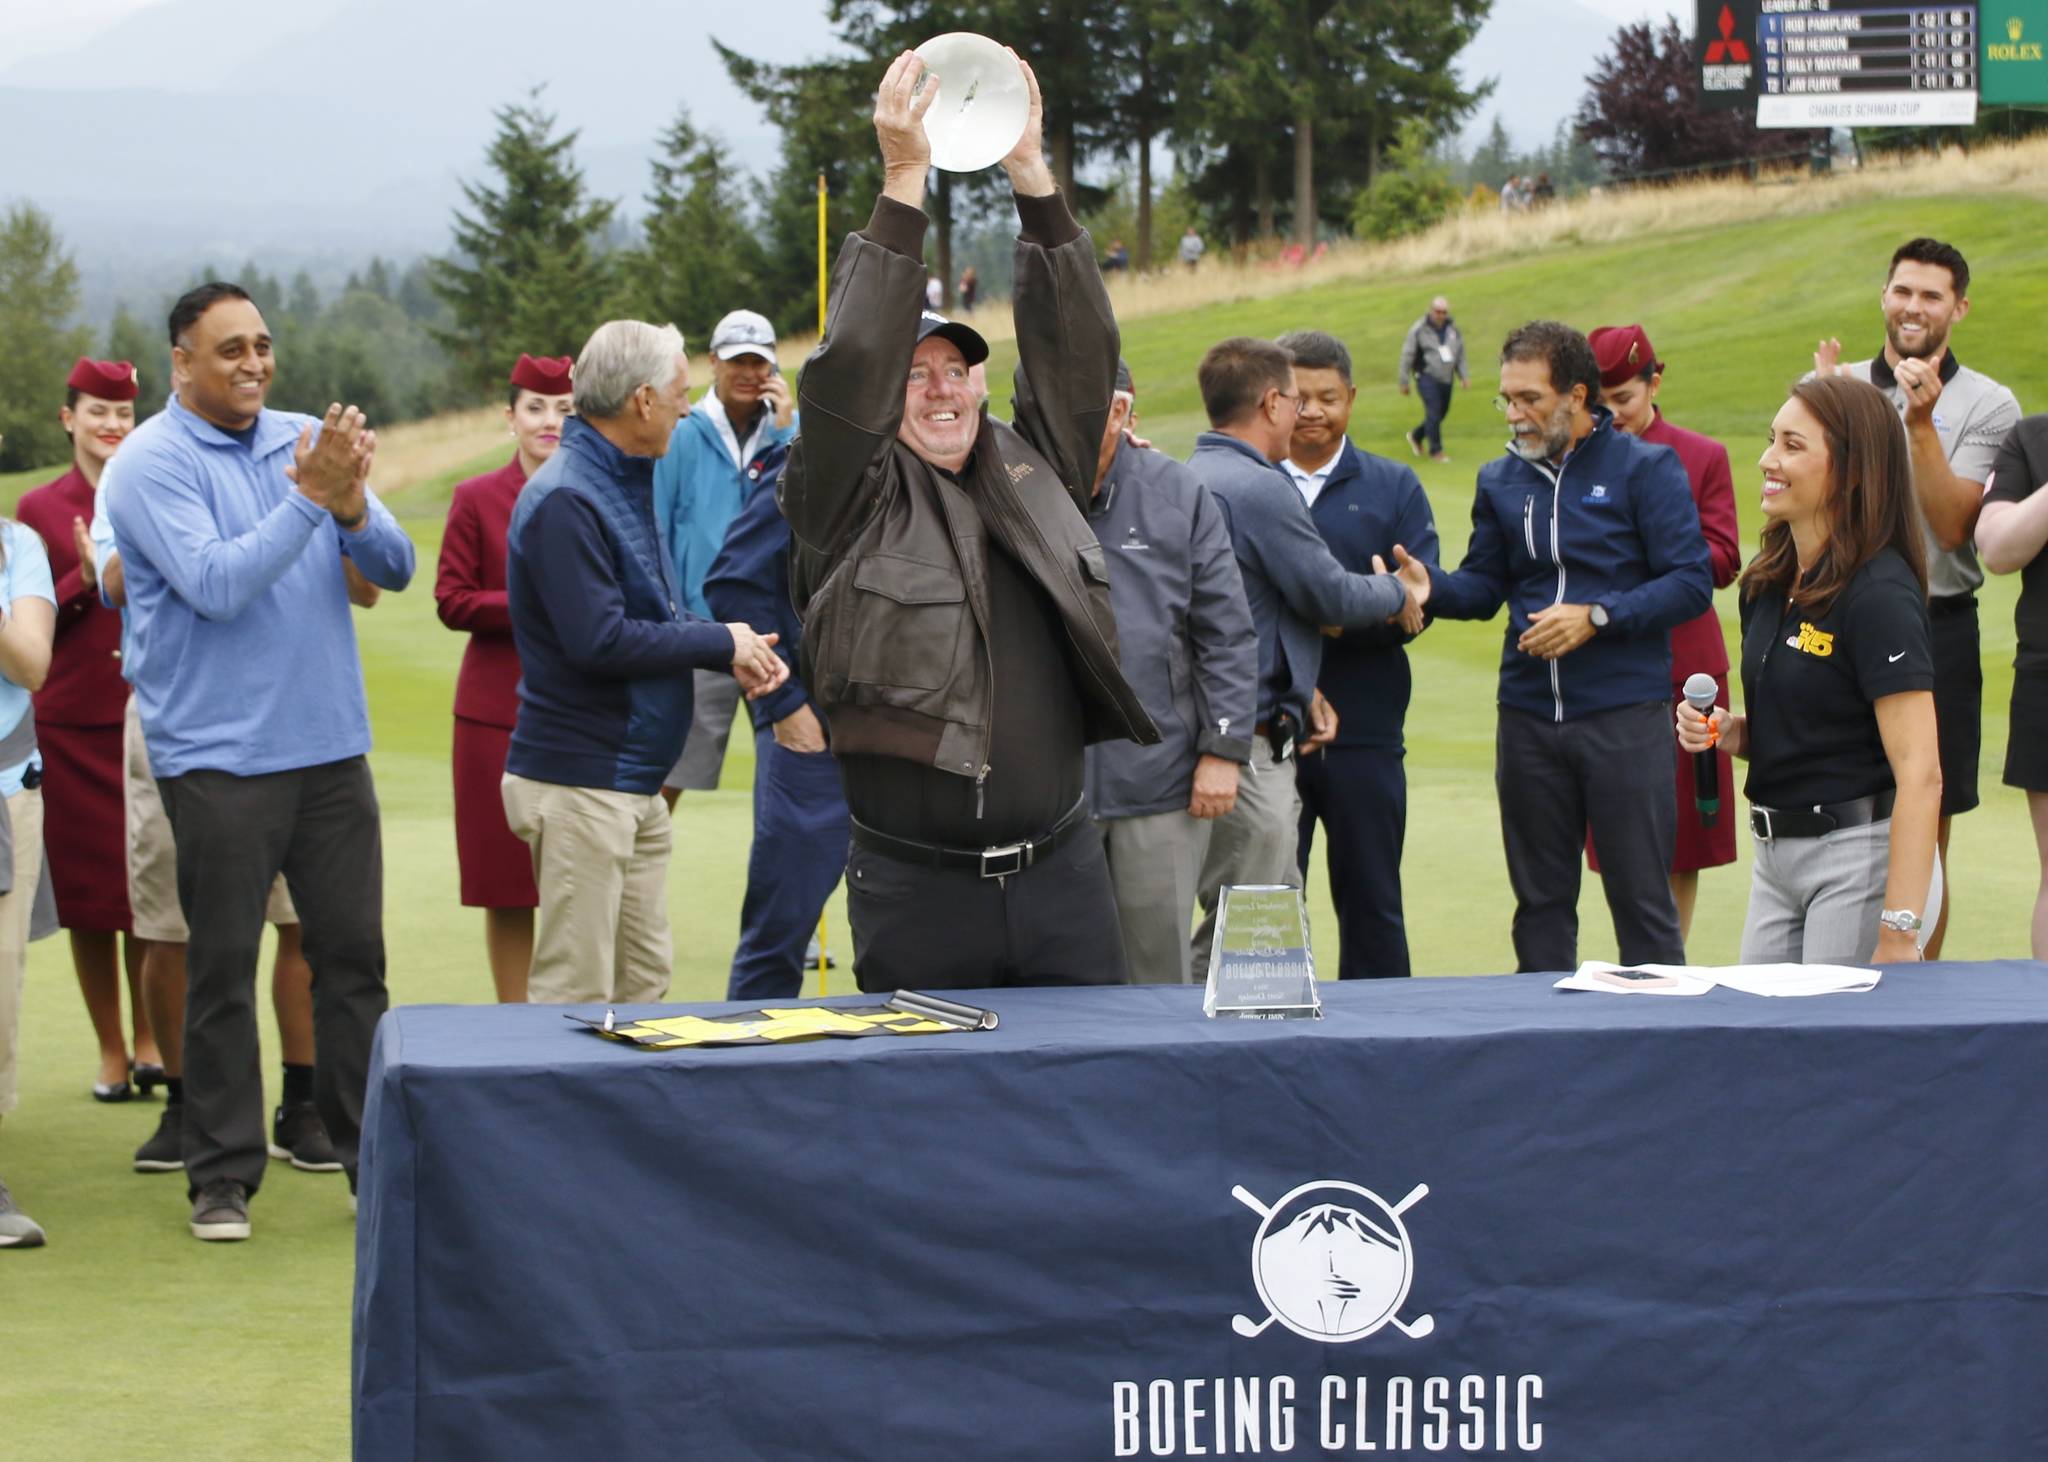 Australia’s Rod Pampling celebrates his Boeing Classic victory at The Club at Snoqualmie Ridge on Sunday. Photo courtesy of Jim Nicholson